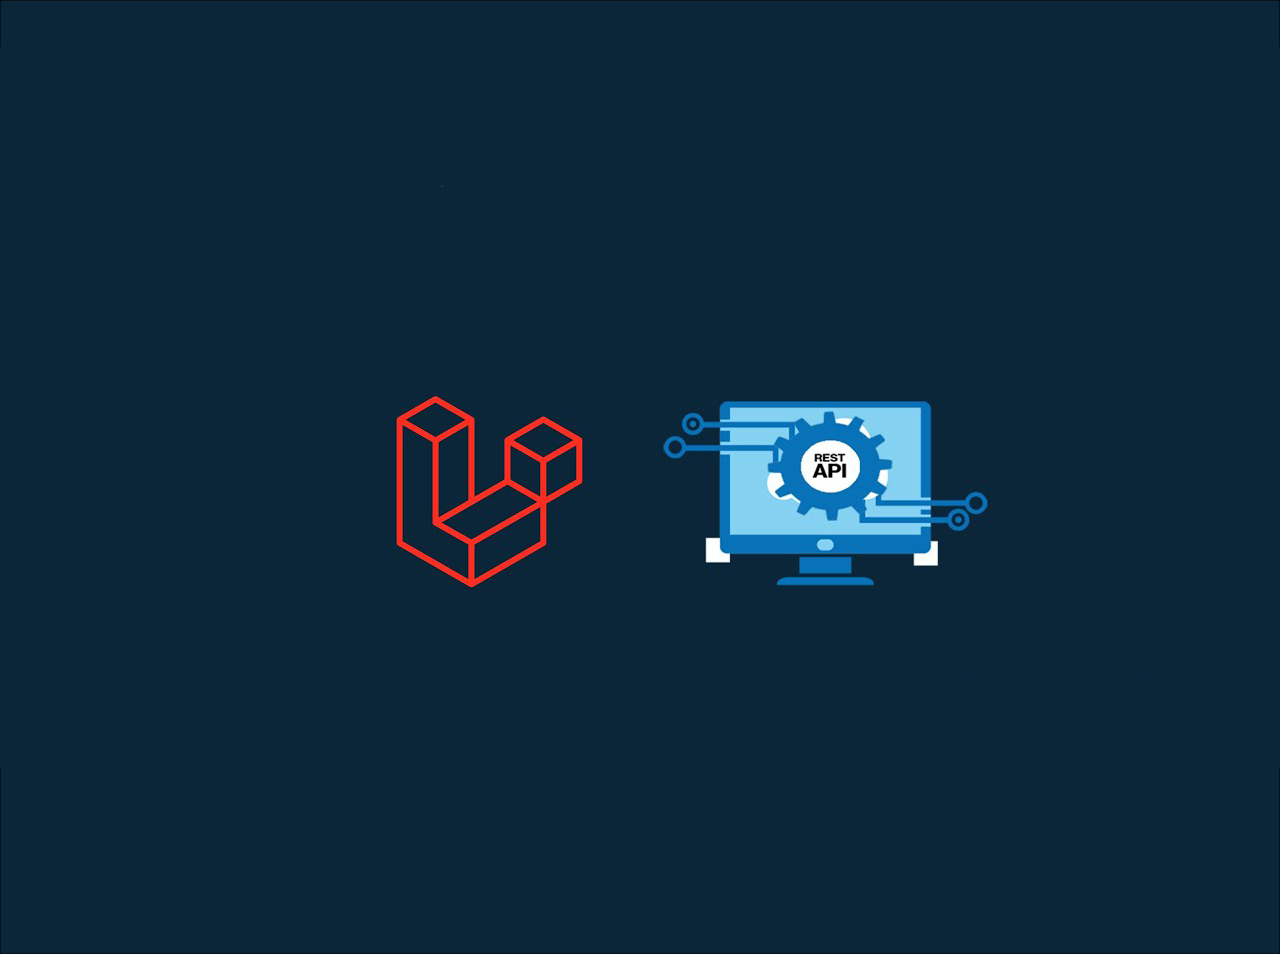 Build a Product Review REST API with Laravel